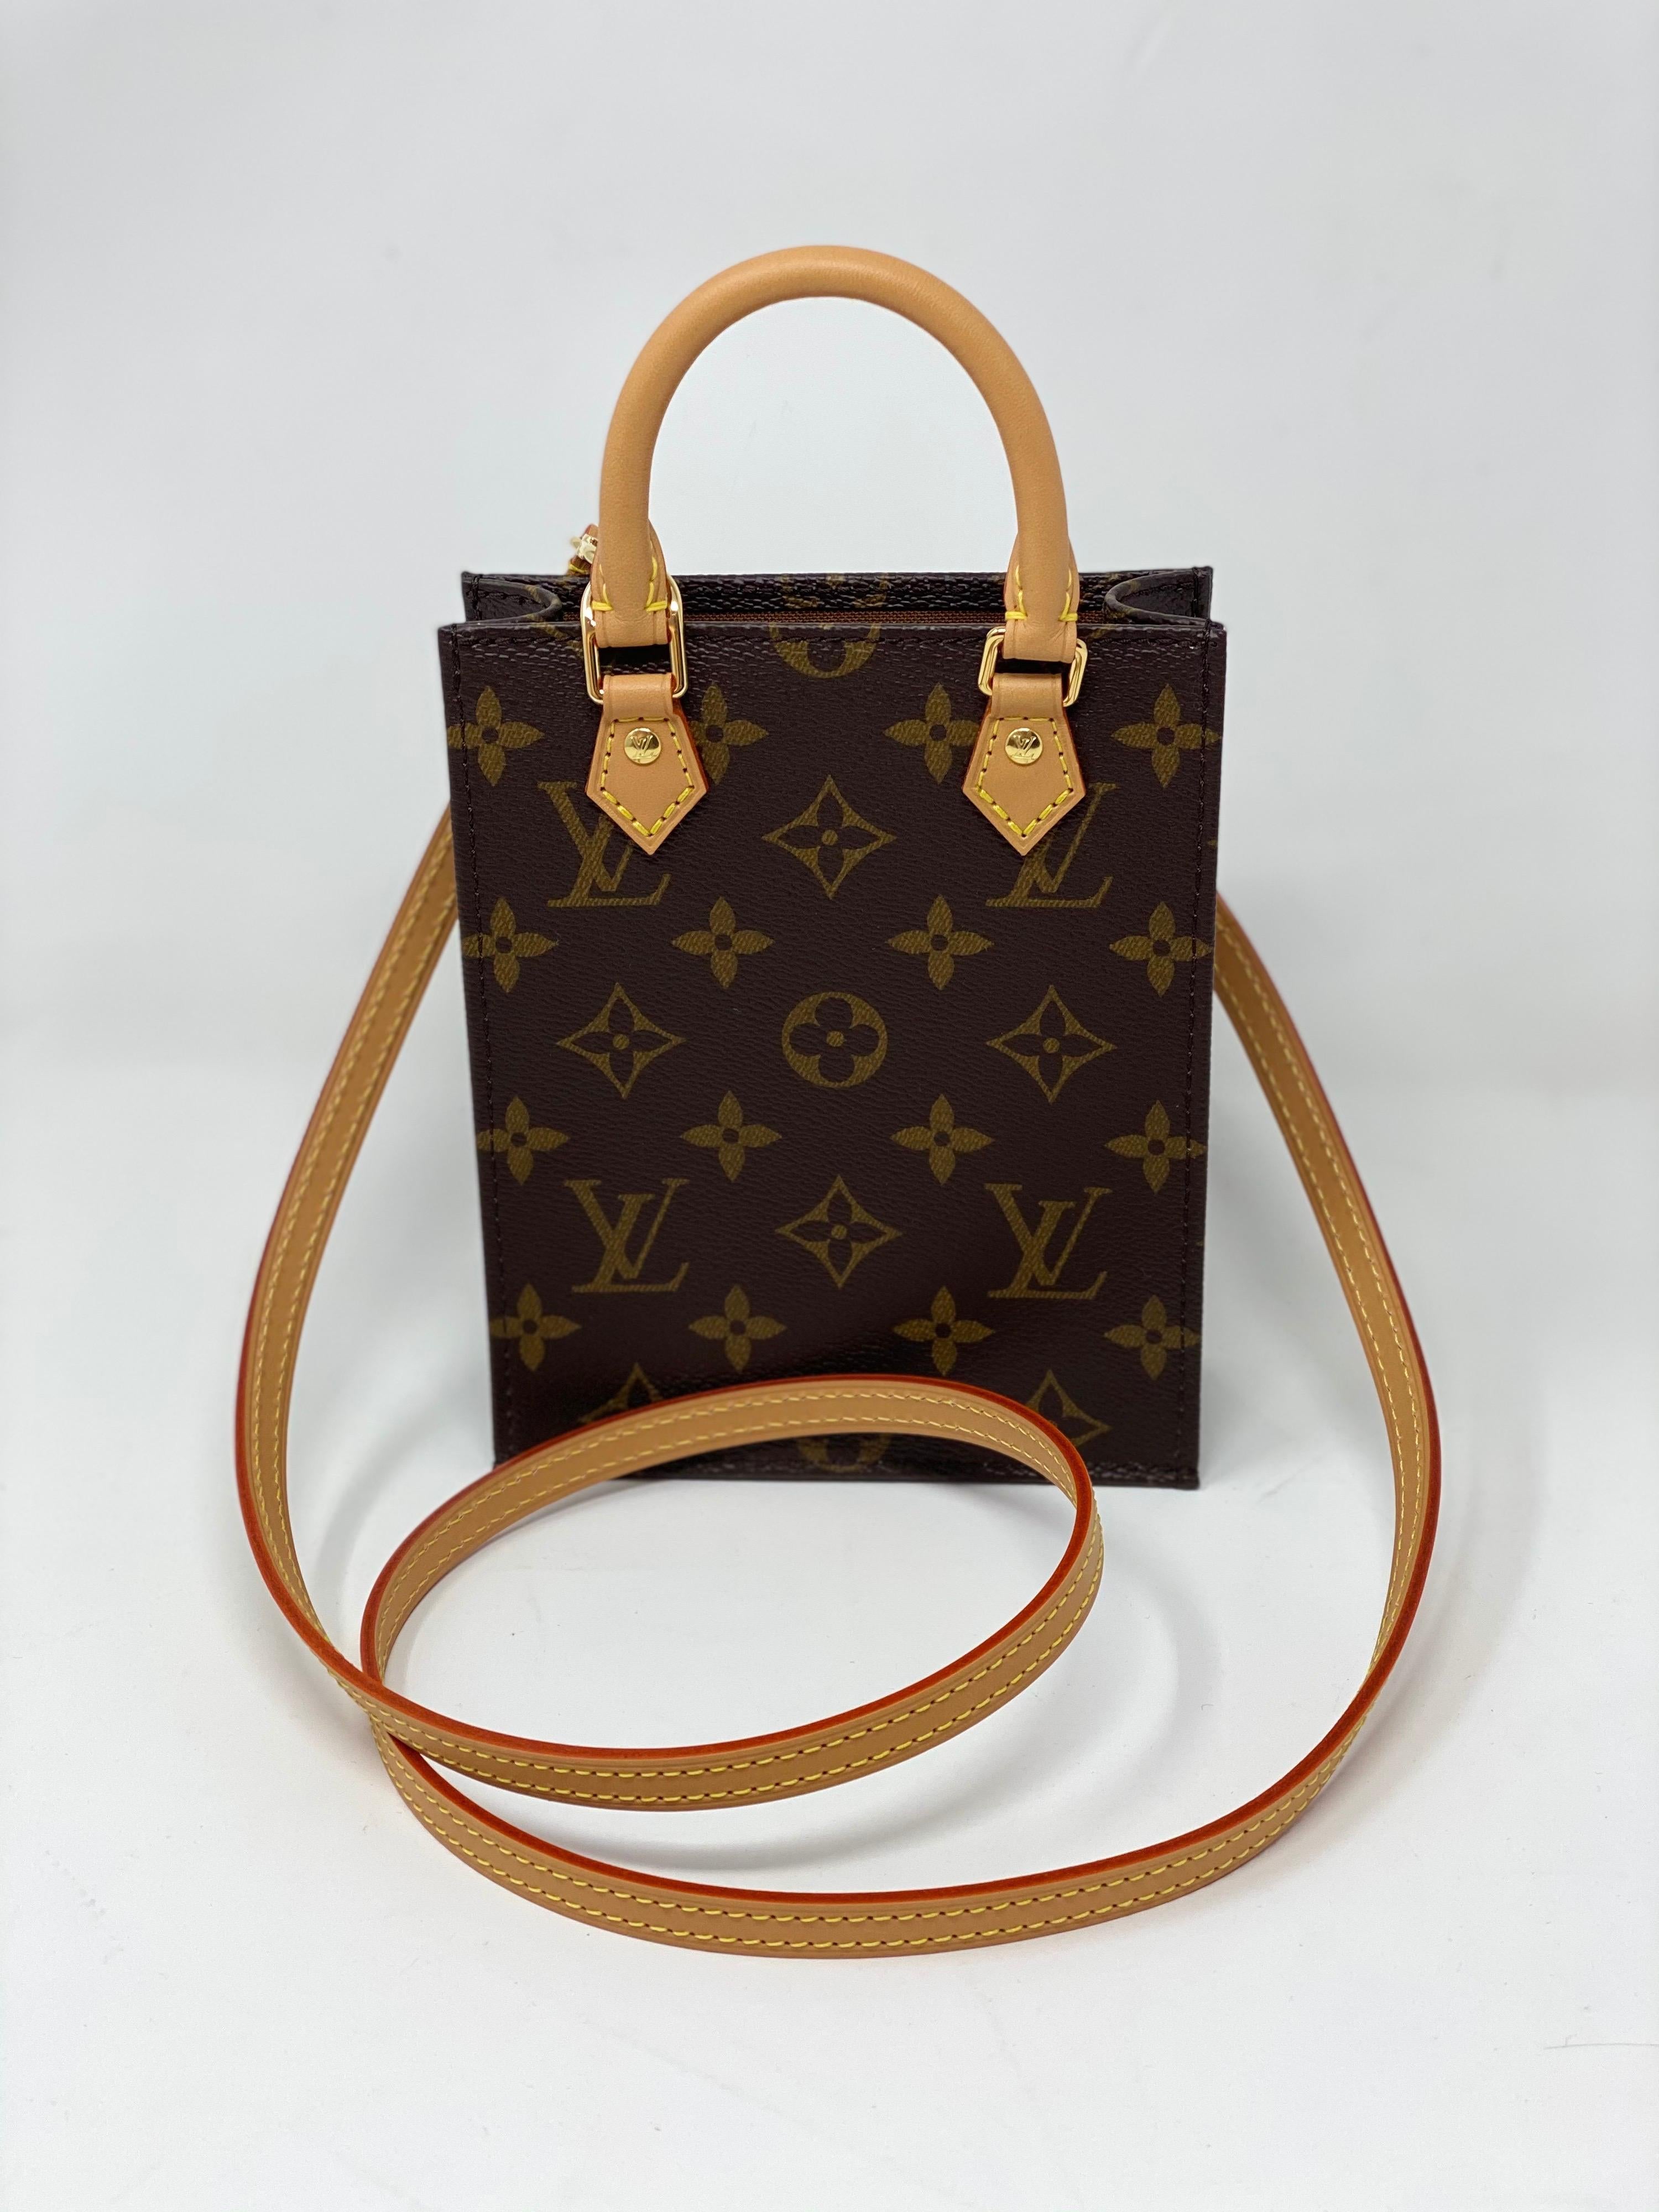 Louis Vuitton Mini Sac Plat Crossbody Bag. Rare and limited bag. Brand new. Cute mini version of the classic big Sac Plat tote that is retired from LV. Monogram canvas with leather strap and handles. Don't miss out on this collector's piece.